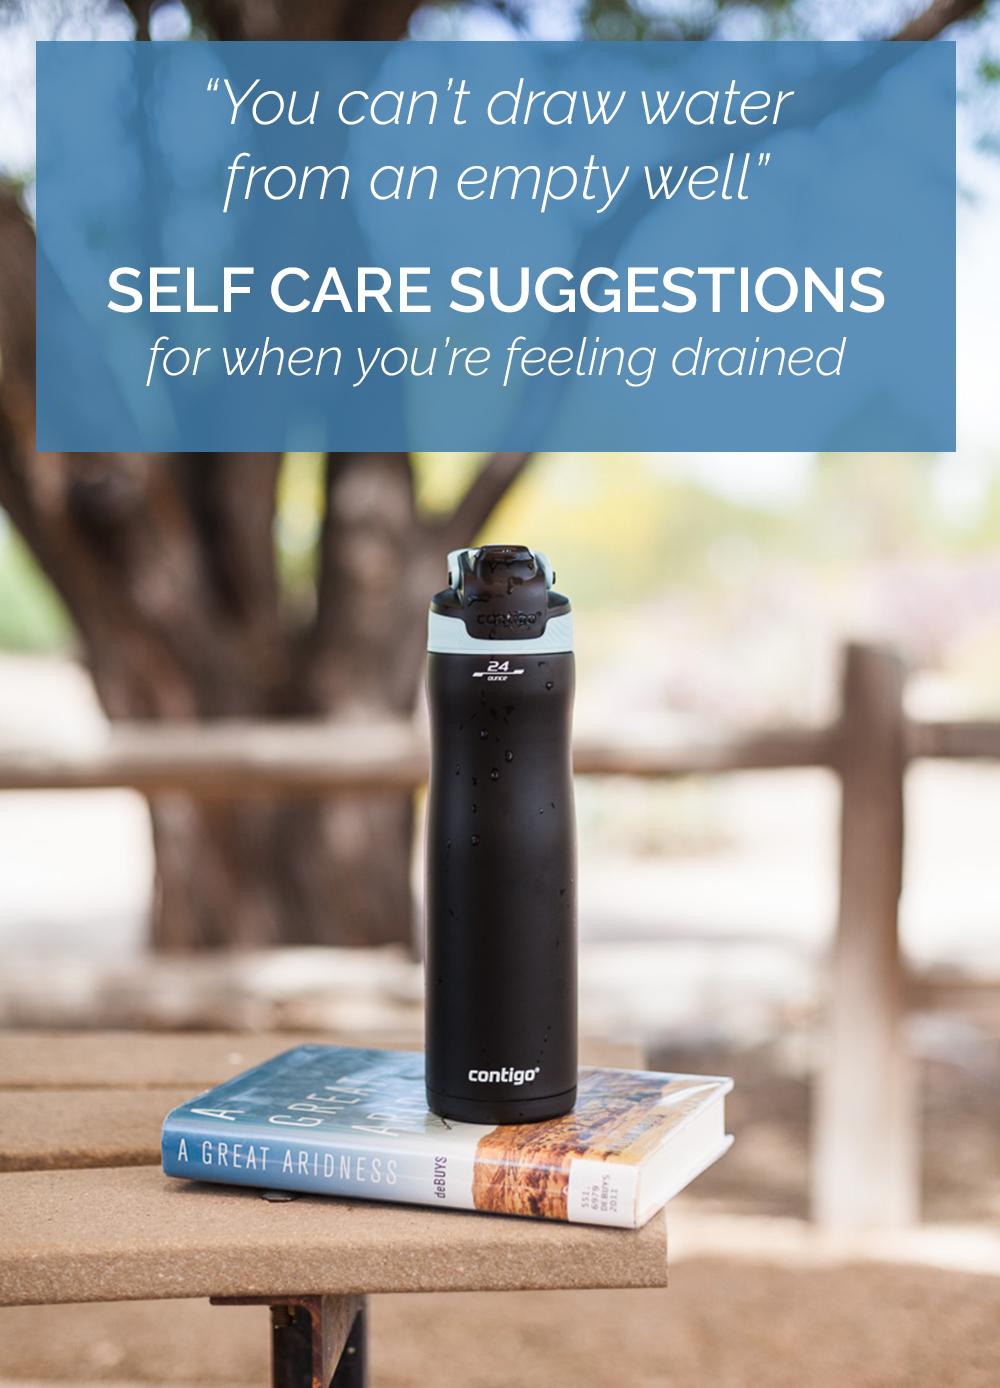 Self Care Suggestions, Because “You Can’t Draw Water From an Empty Well”